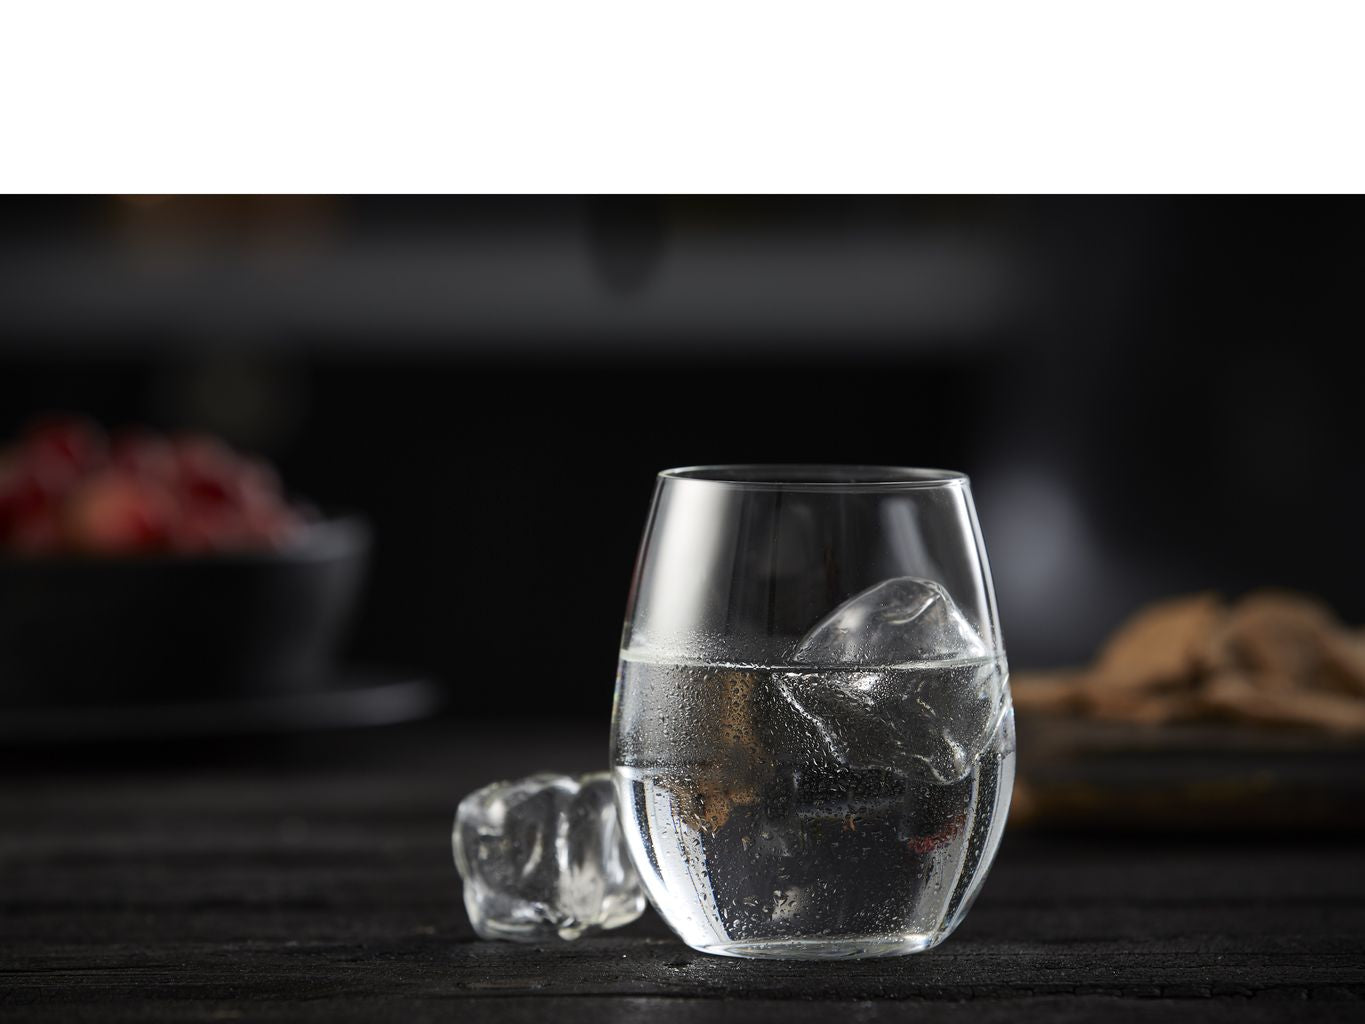 Lyngby Glas Juvel Water Glass 39 Cl, 6 Stcs.